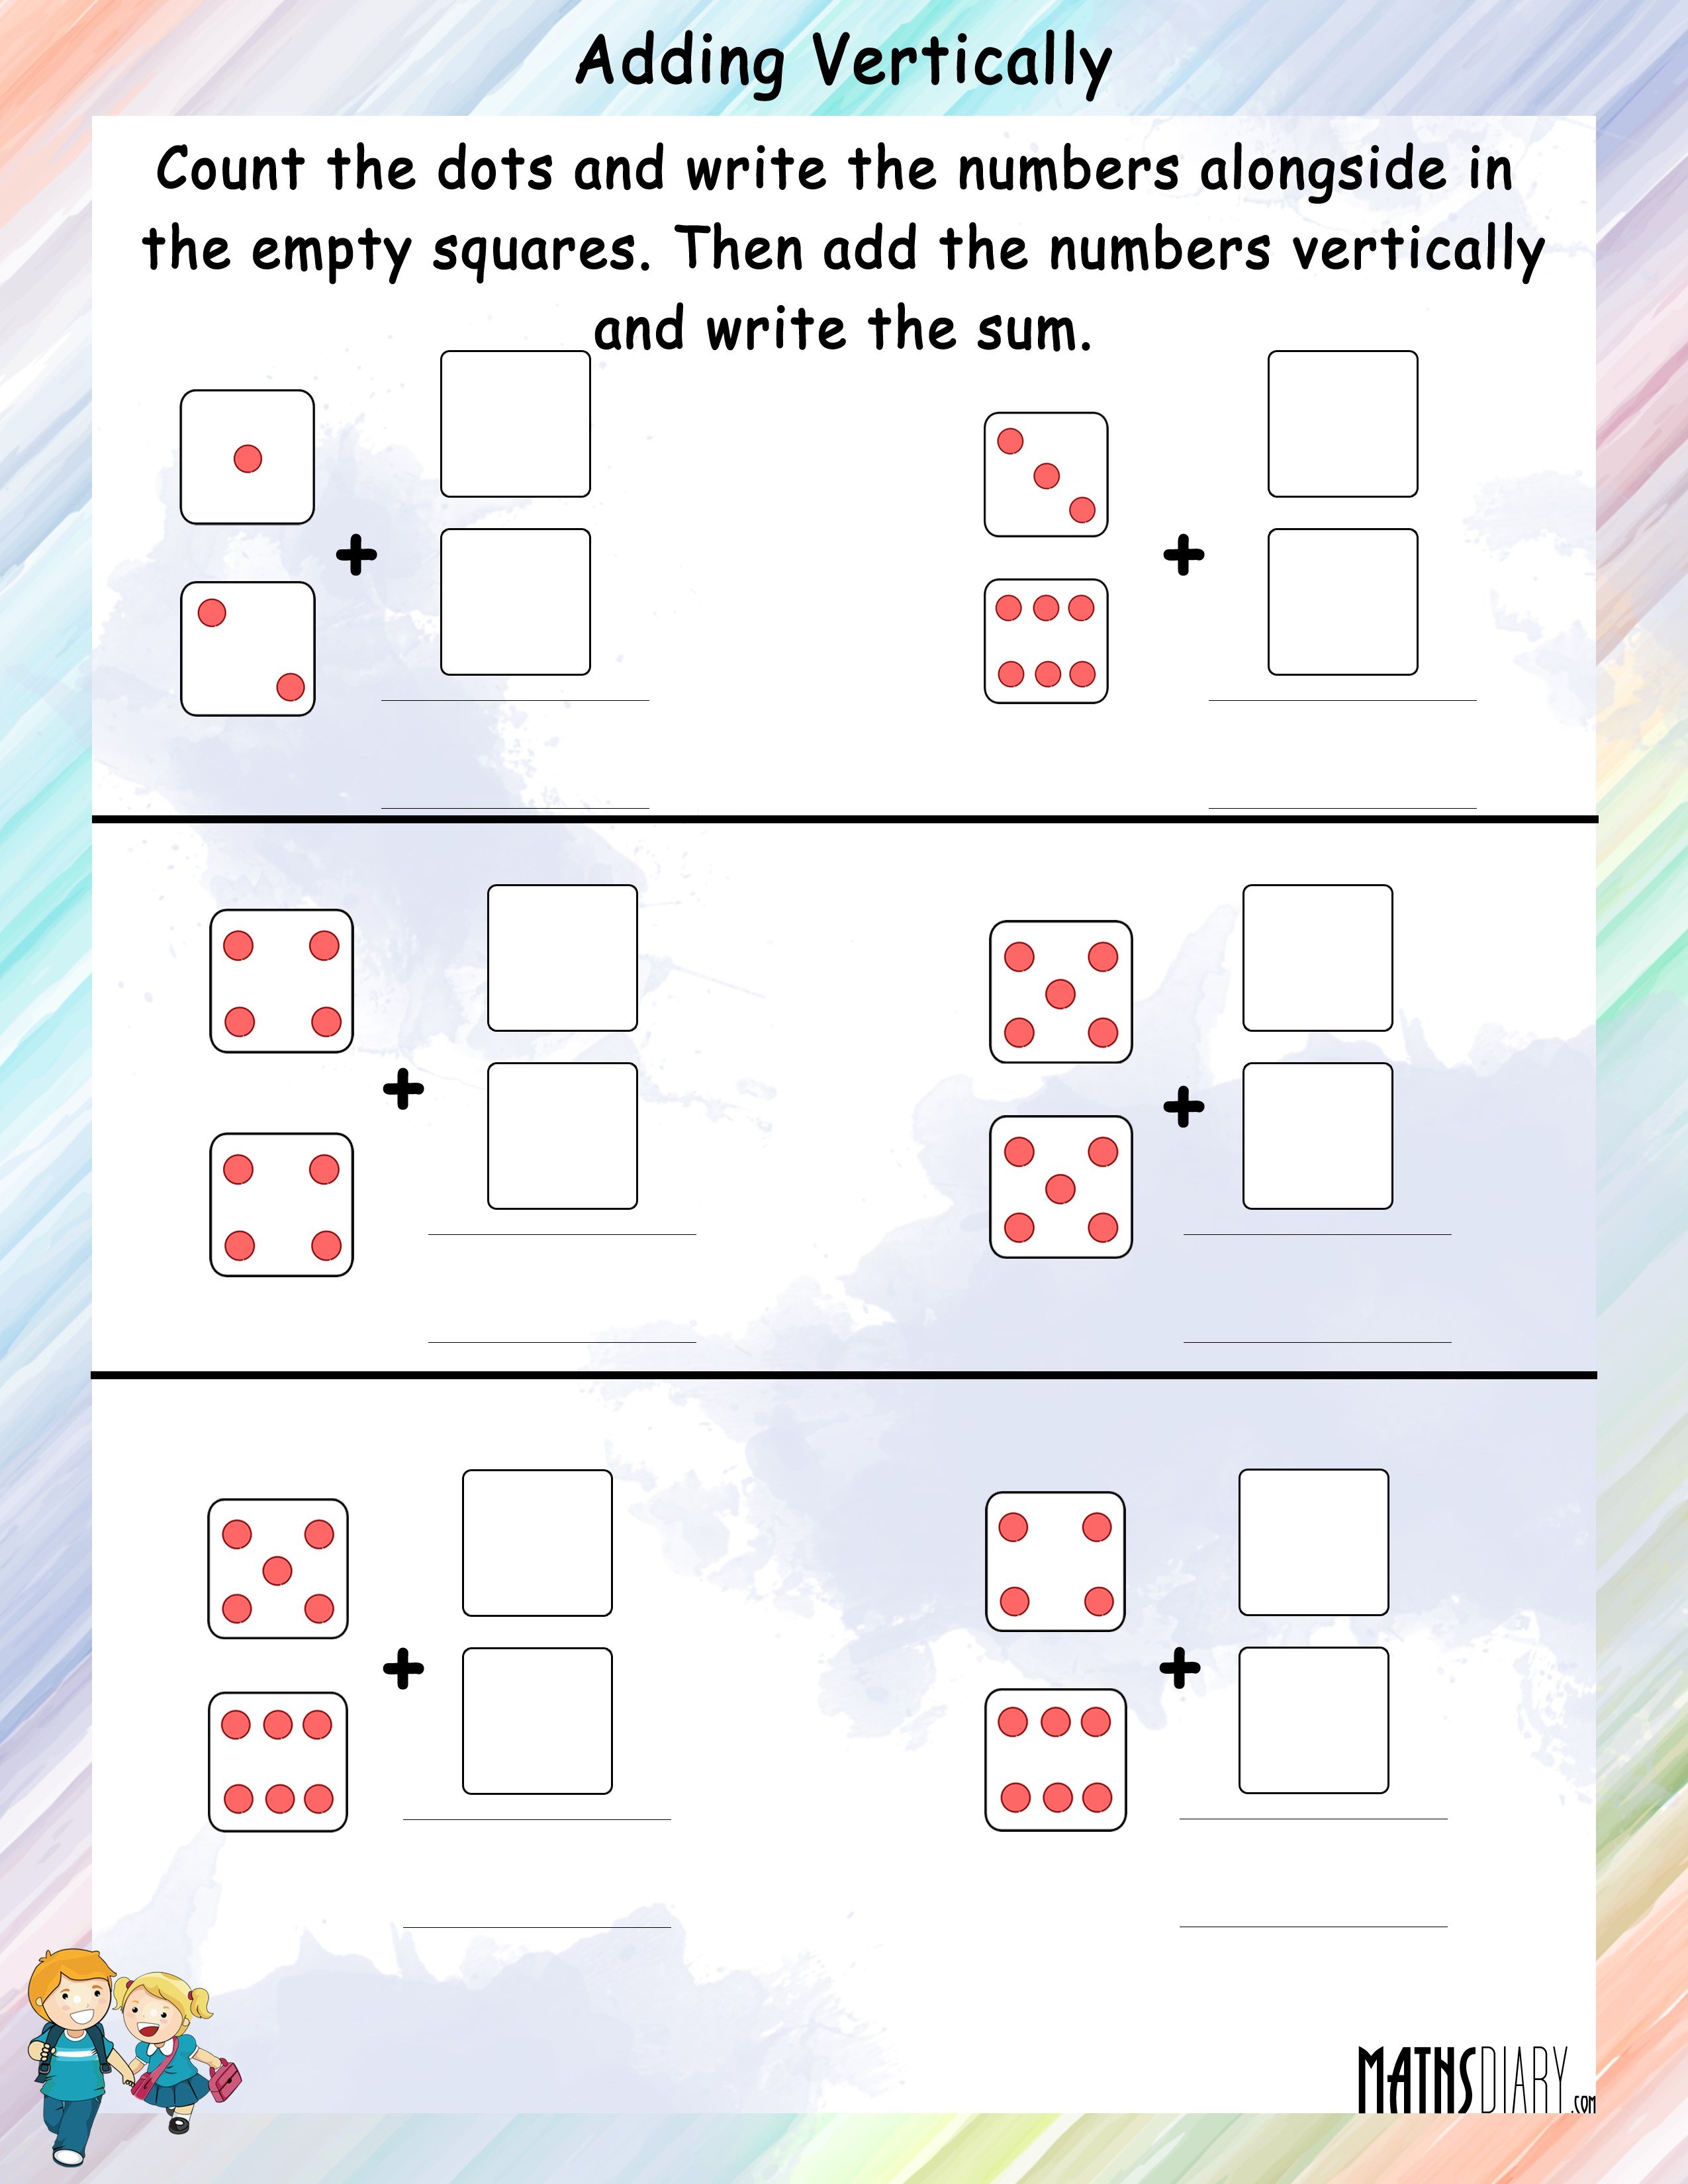 mixed-numbers-and-decimals-worksheets